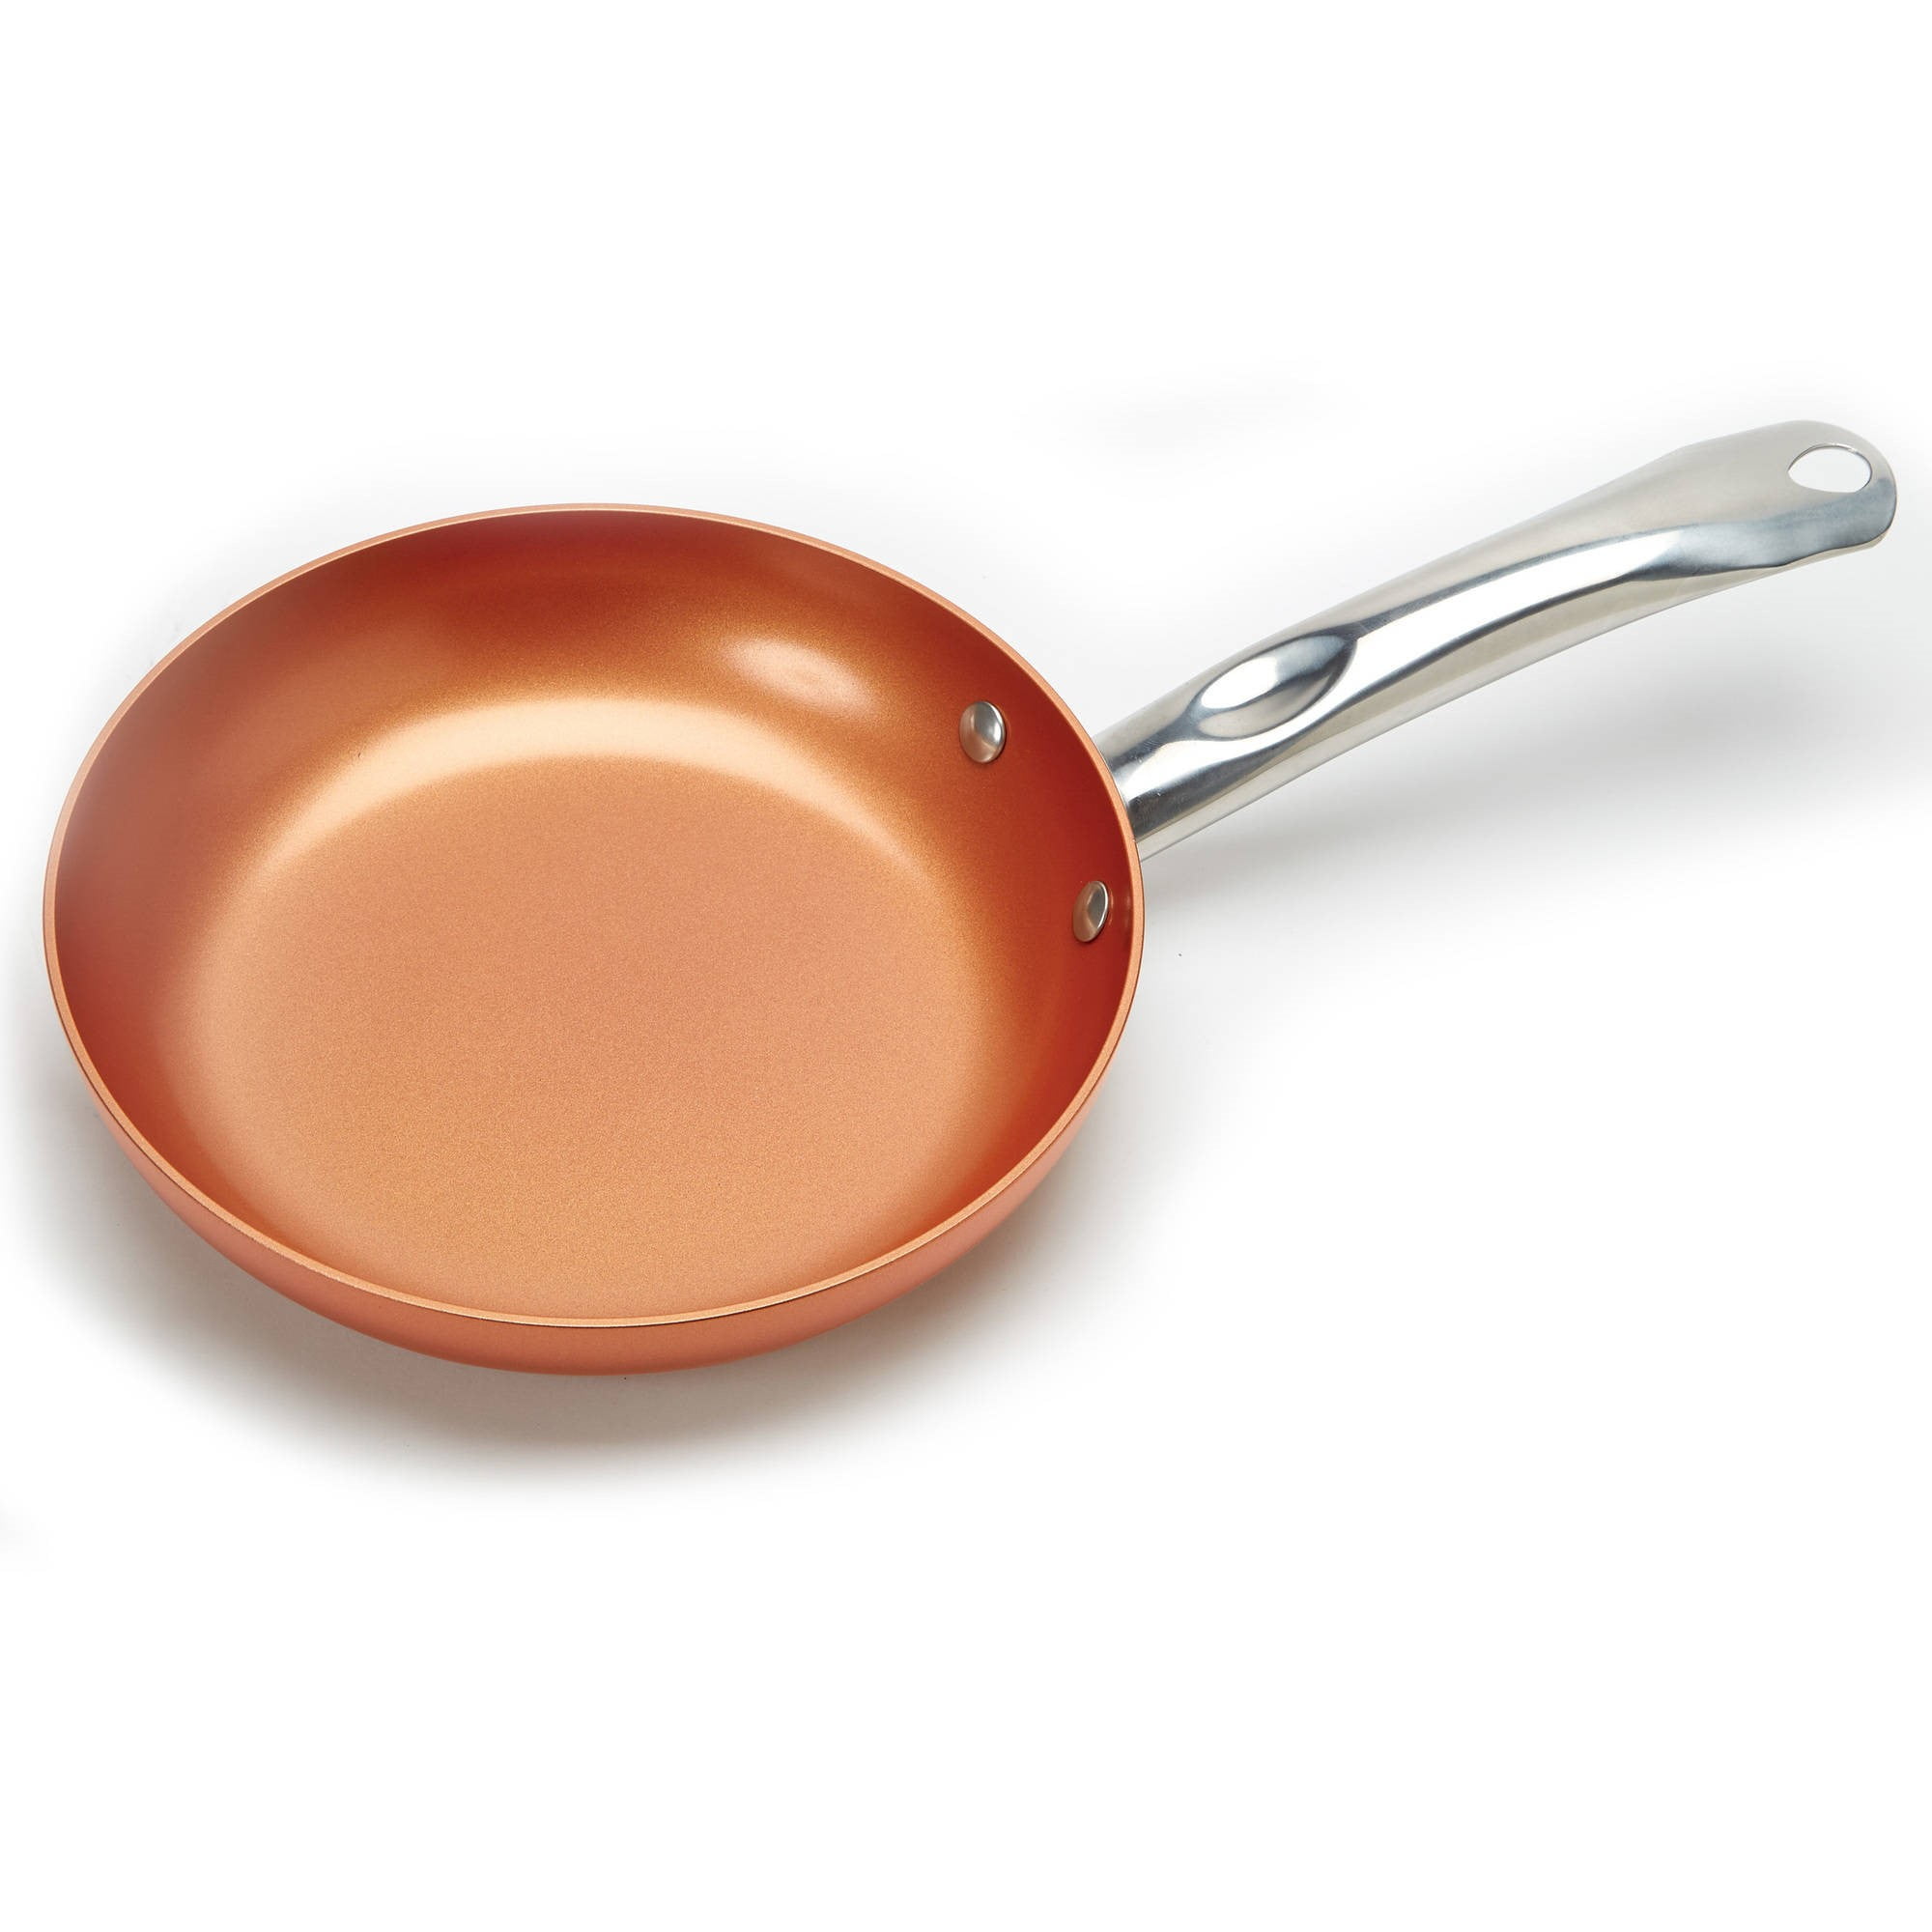 2 Pans Red Copper Frying Pan 8 Inch Ceramic Nonstick as Seen on TV 8" Eggs for sale online 